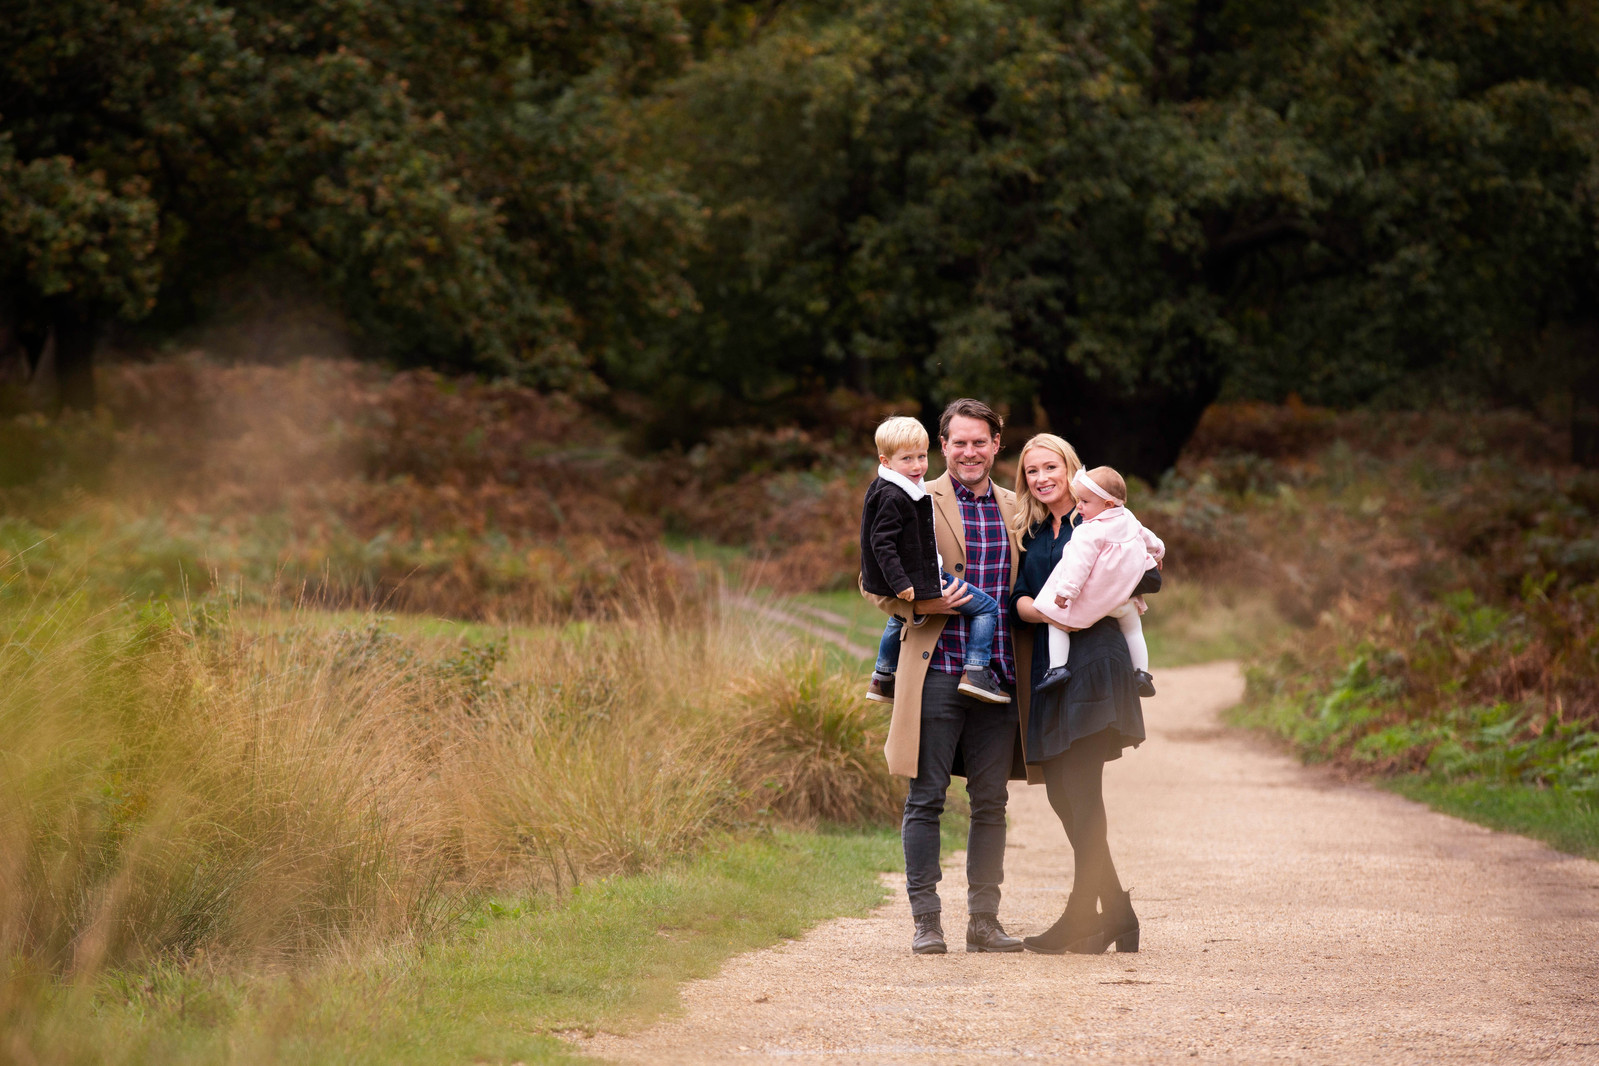 A beautiful young family stand on a pathway in Avon Heath posing for a photo. The parents are holding their 5 year old son and 2 year old daughter.